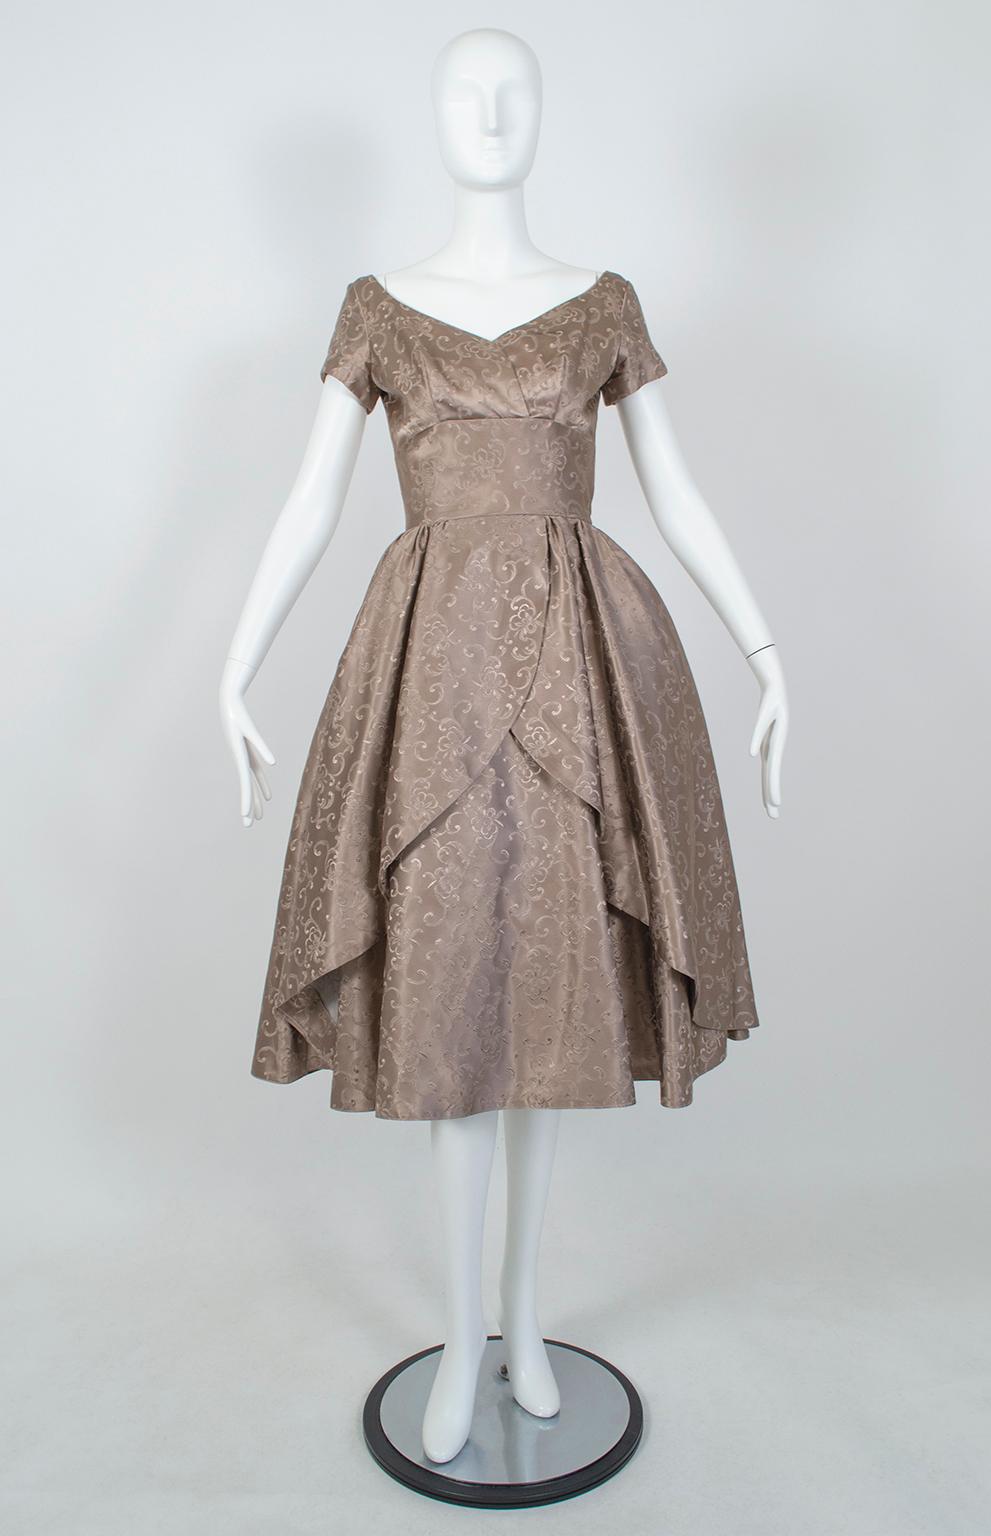 From the estate of a mid-century opera singer comes this New Look party dress, which looks like it might have stepped out of a Henry Clarke fashion shoot. High fashion touches like a cummerbund waist and cutaway skirt are complemented by thoughtful